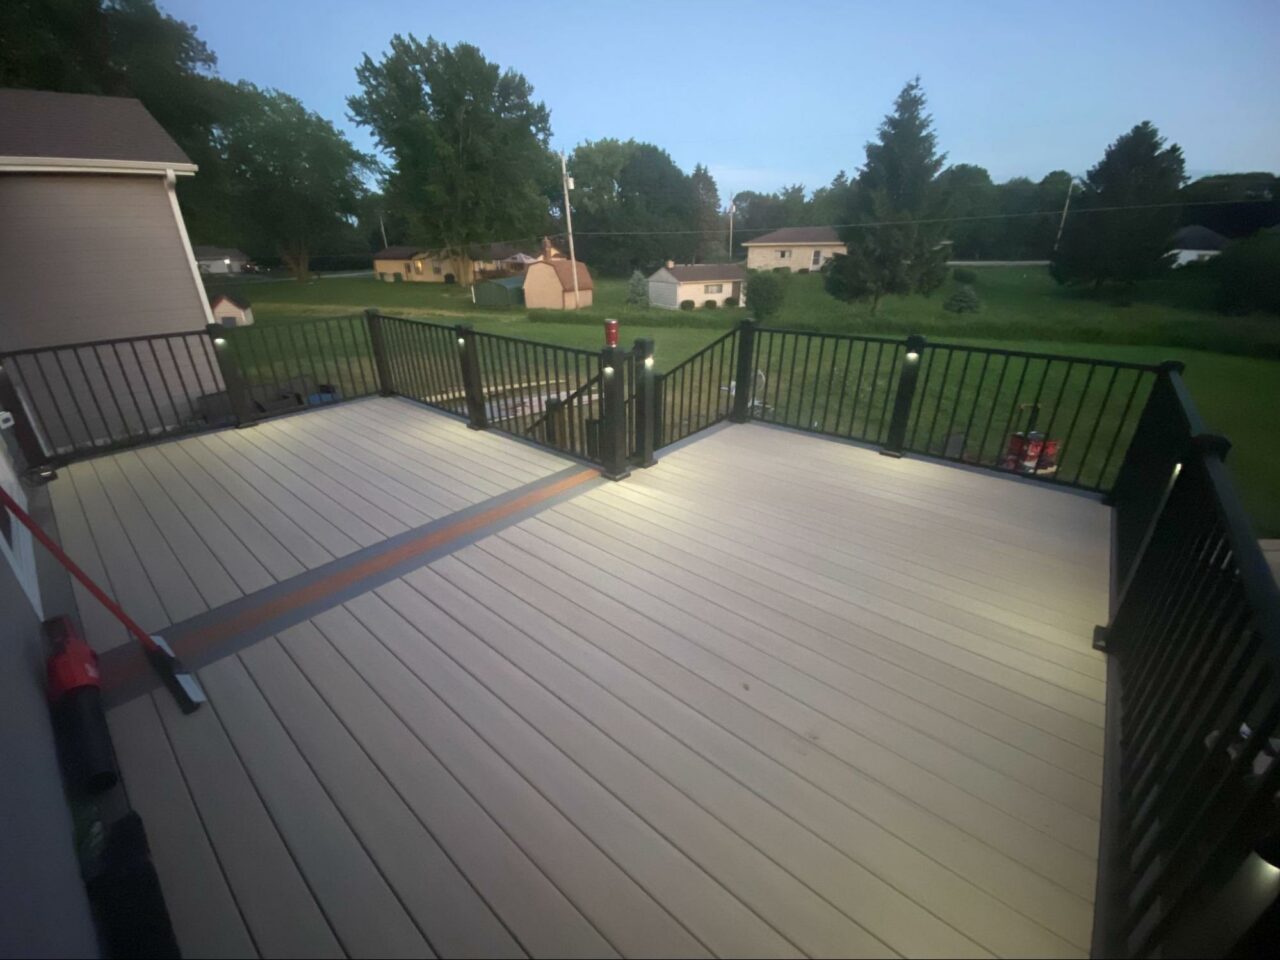 Photo of Composite Deck with Inlays, Black Railing, and Steps - Custom Deck Railings builder and contractor Services Washington County, WI